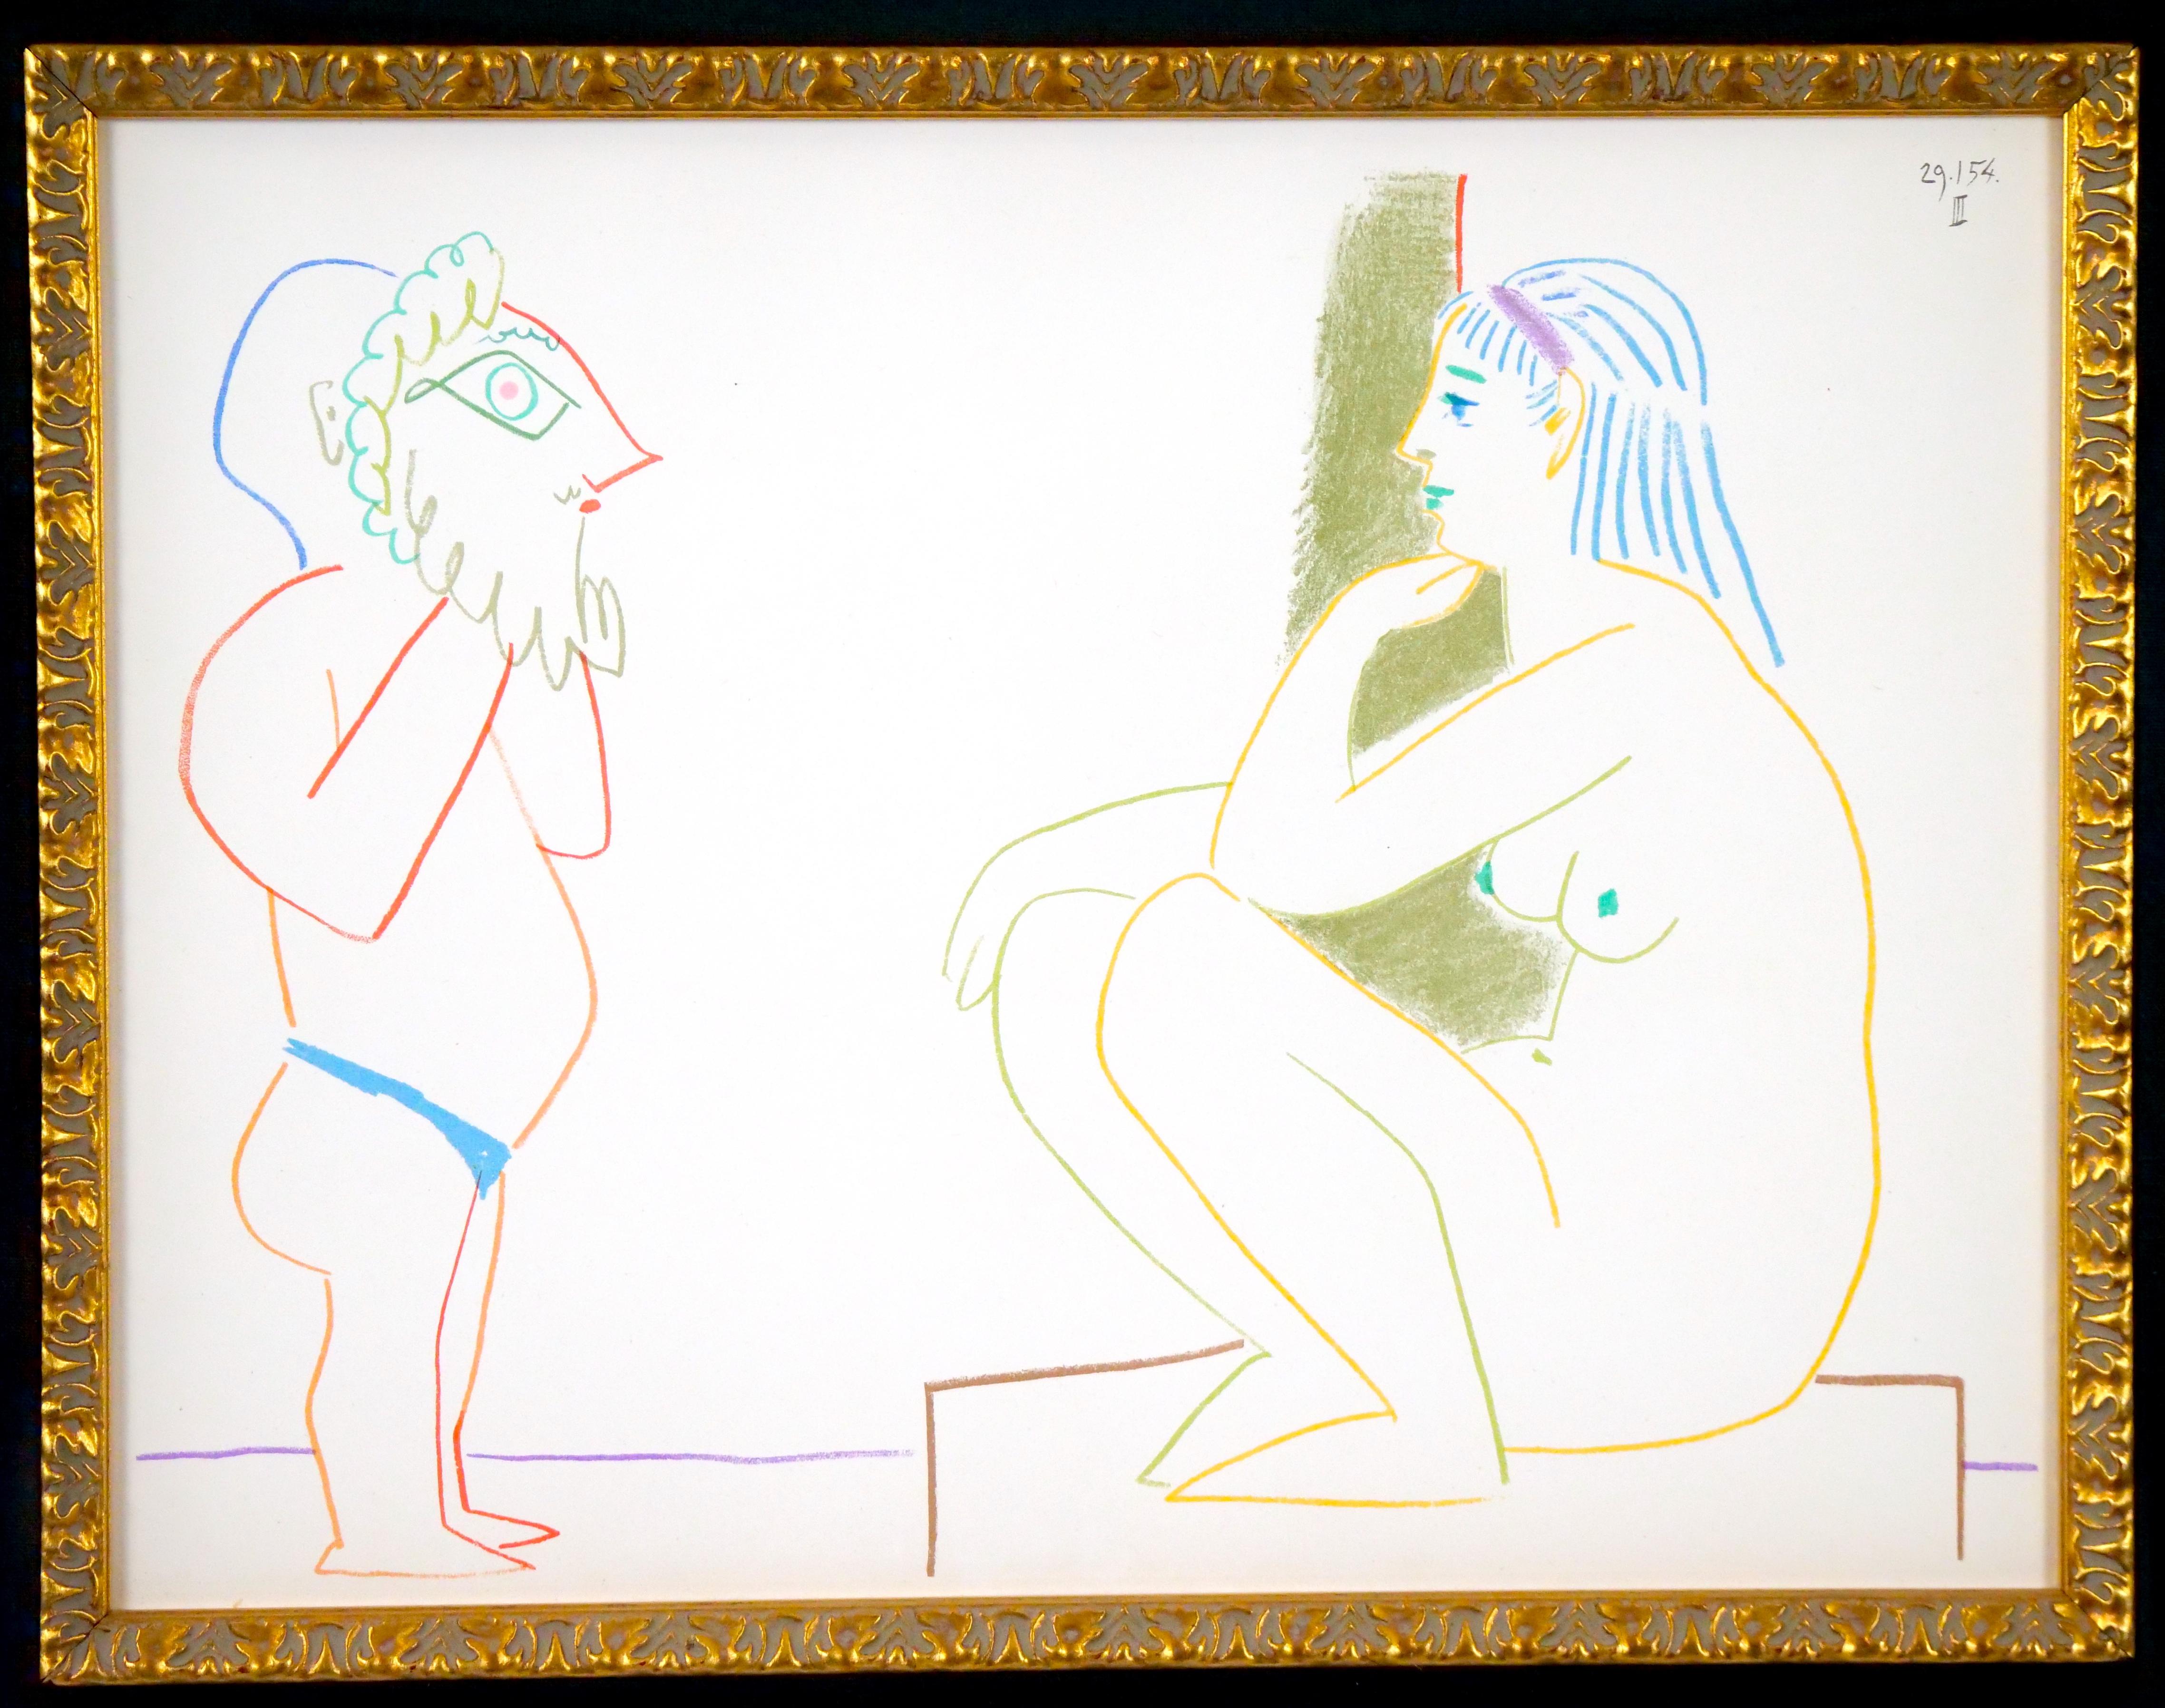 Immerse yourself in the artistic brilliance of this Gilt Wood Framed Original Lithograph by Pablo Picasso. Crafted with meticulous care, this piece presents an original drawing printed in rich, vibrant colors on premium wove paper. Created in 1954,